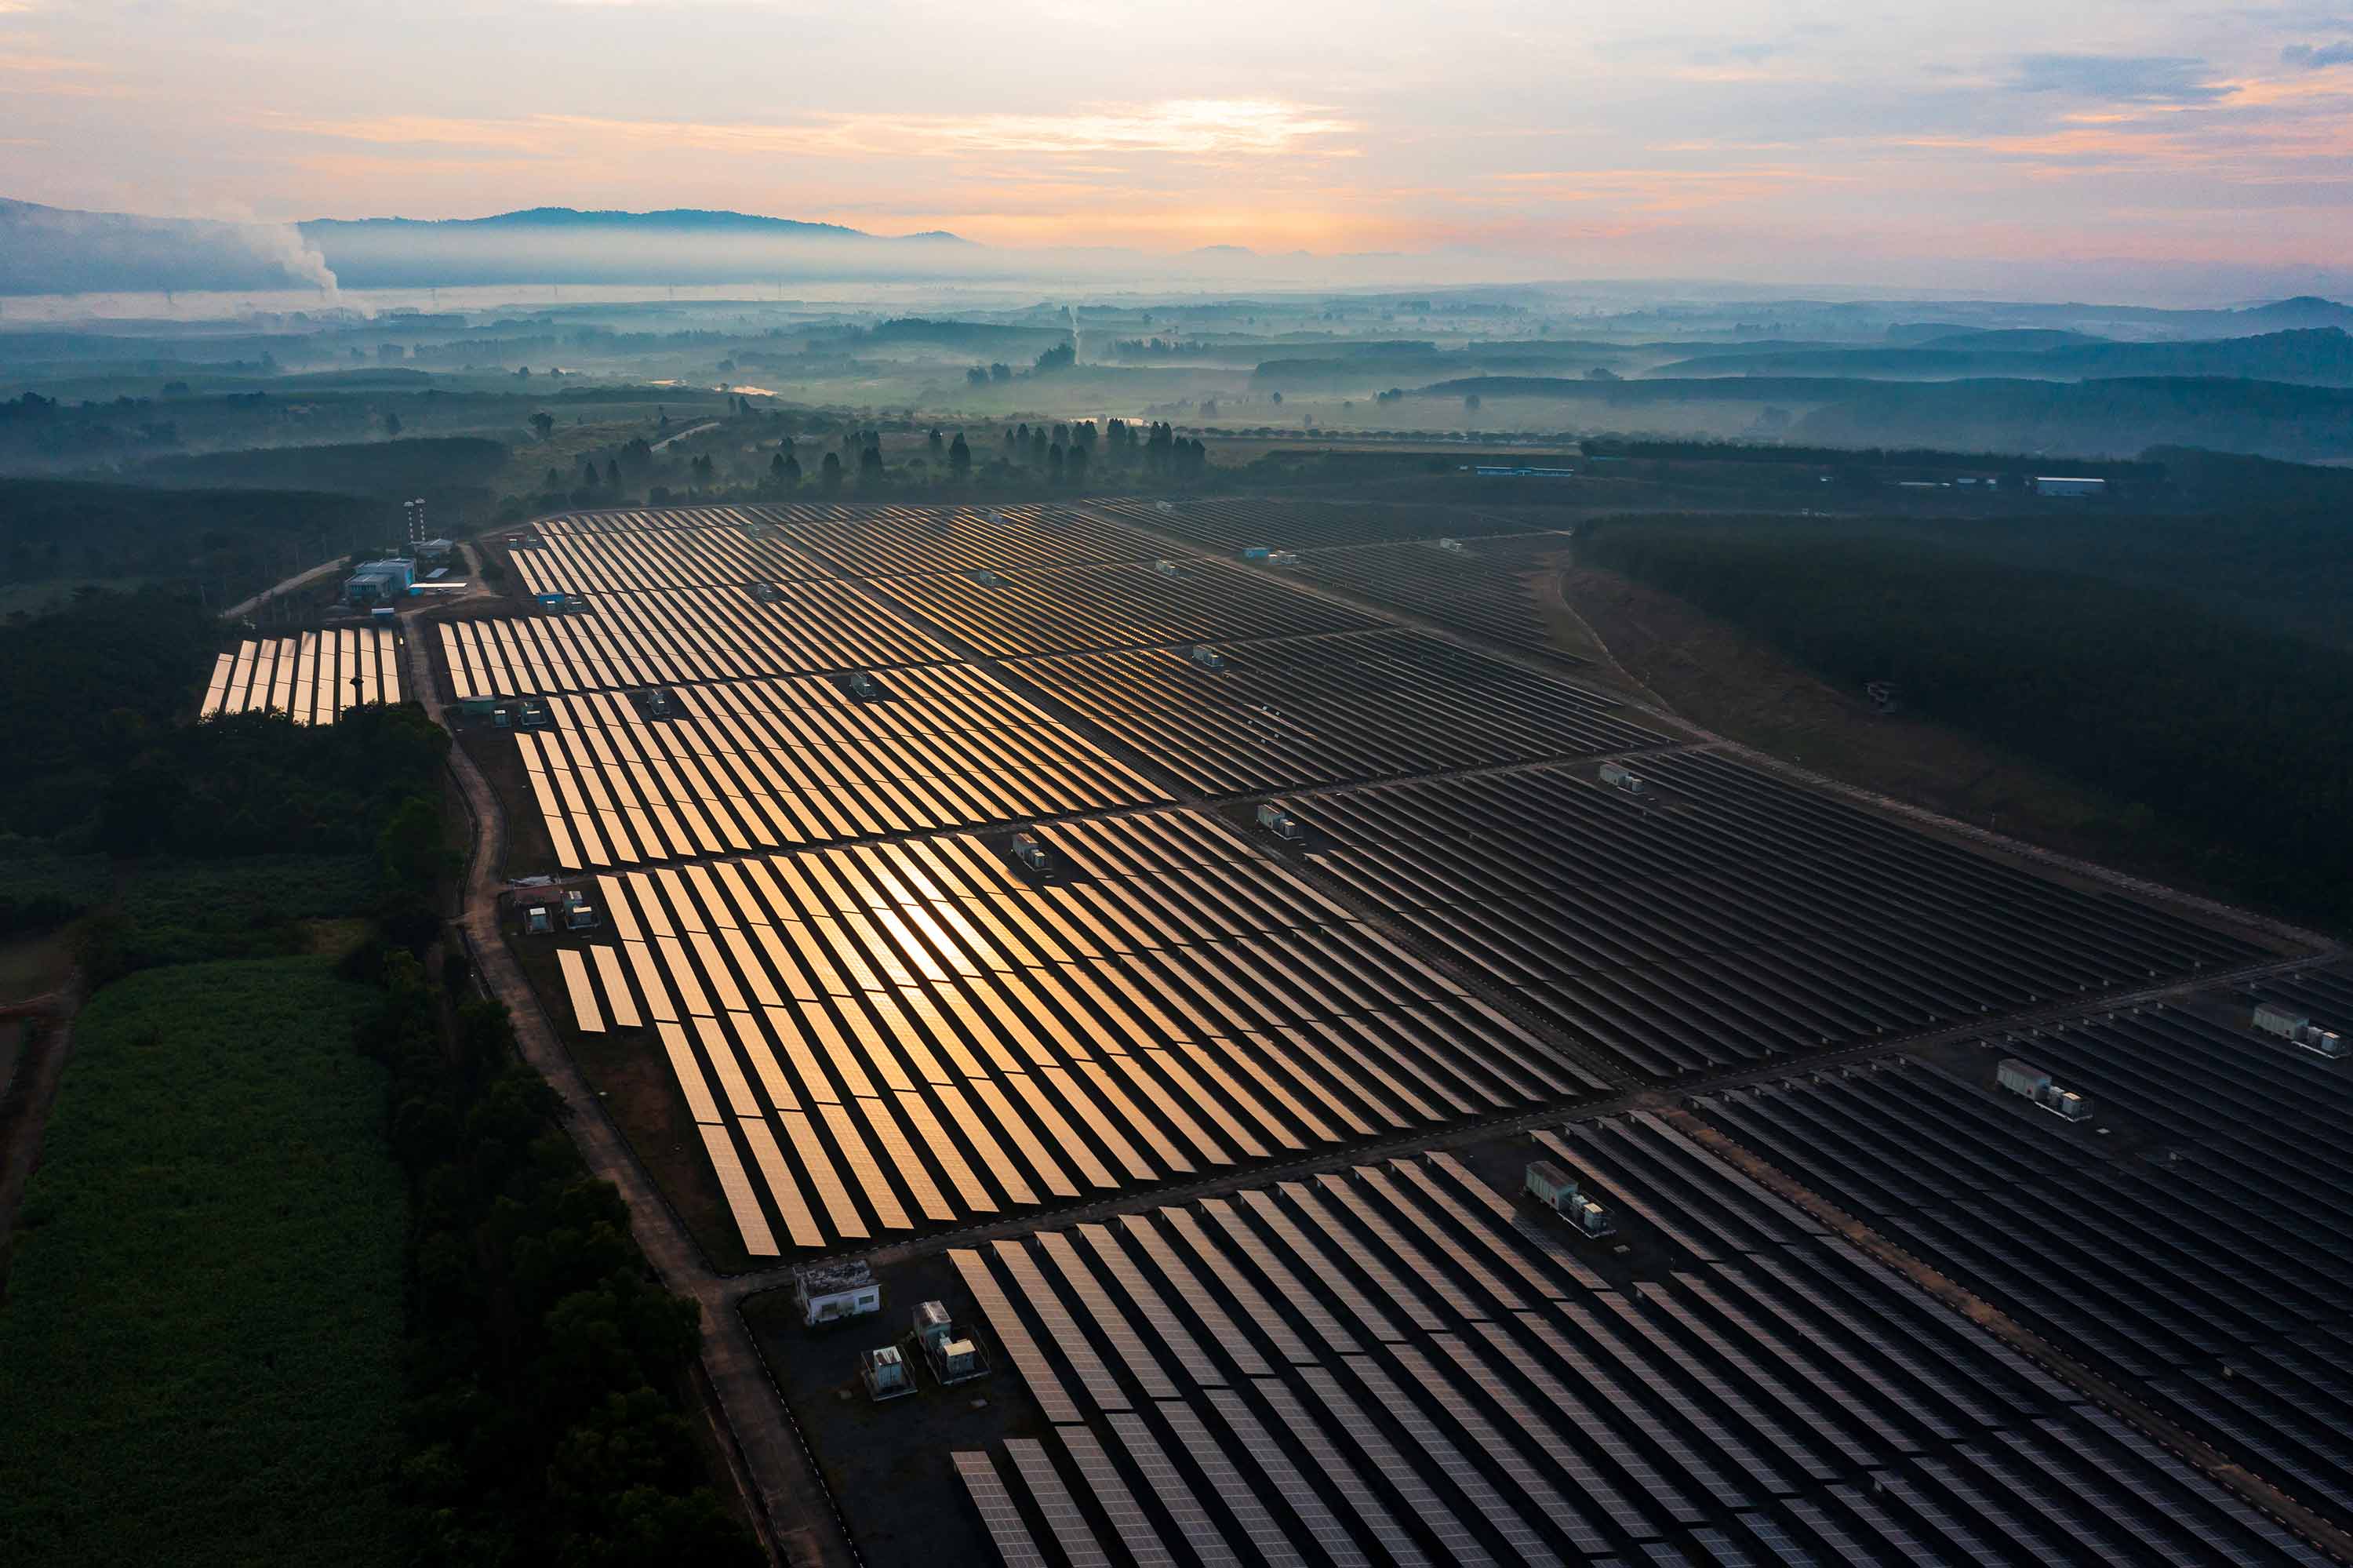 High view of rows and rows of solar panels reflecting gold in sunshine.